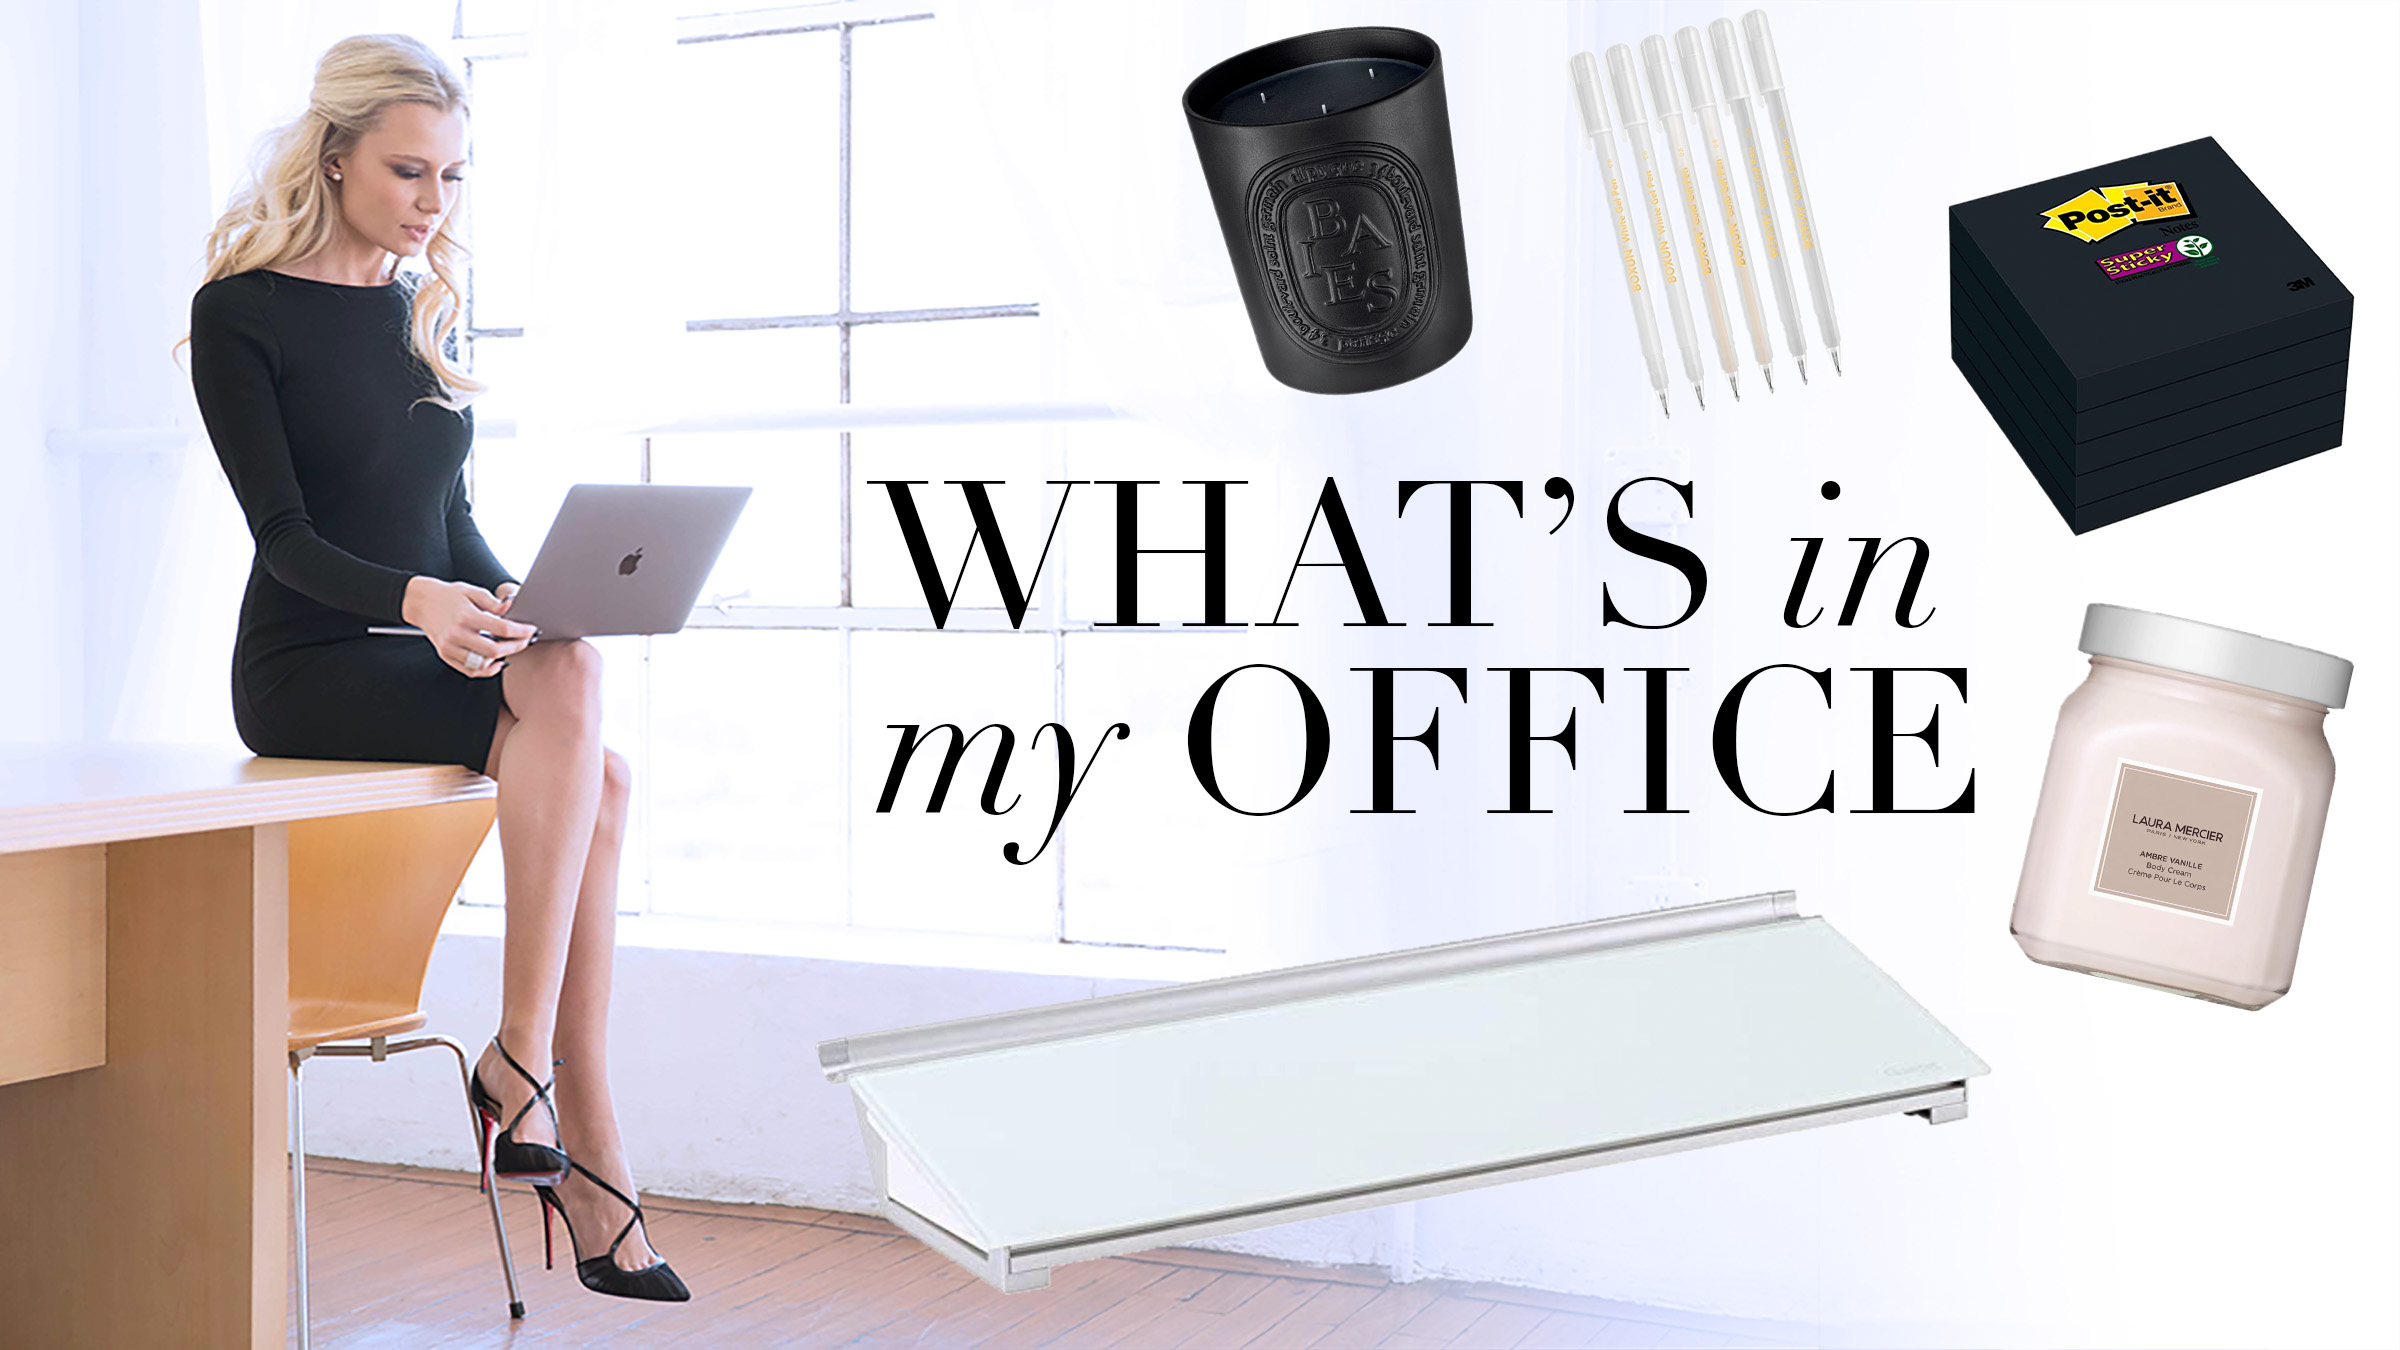 What's in my office: WorkWoman office essentials